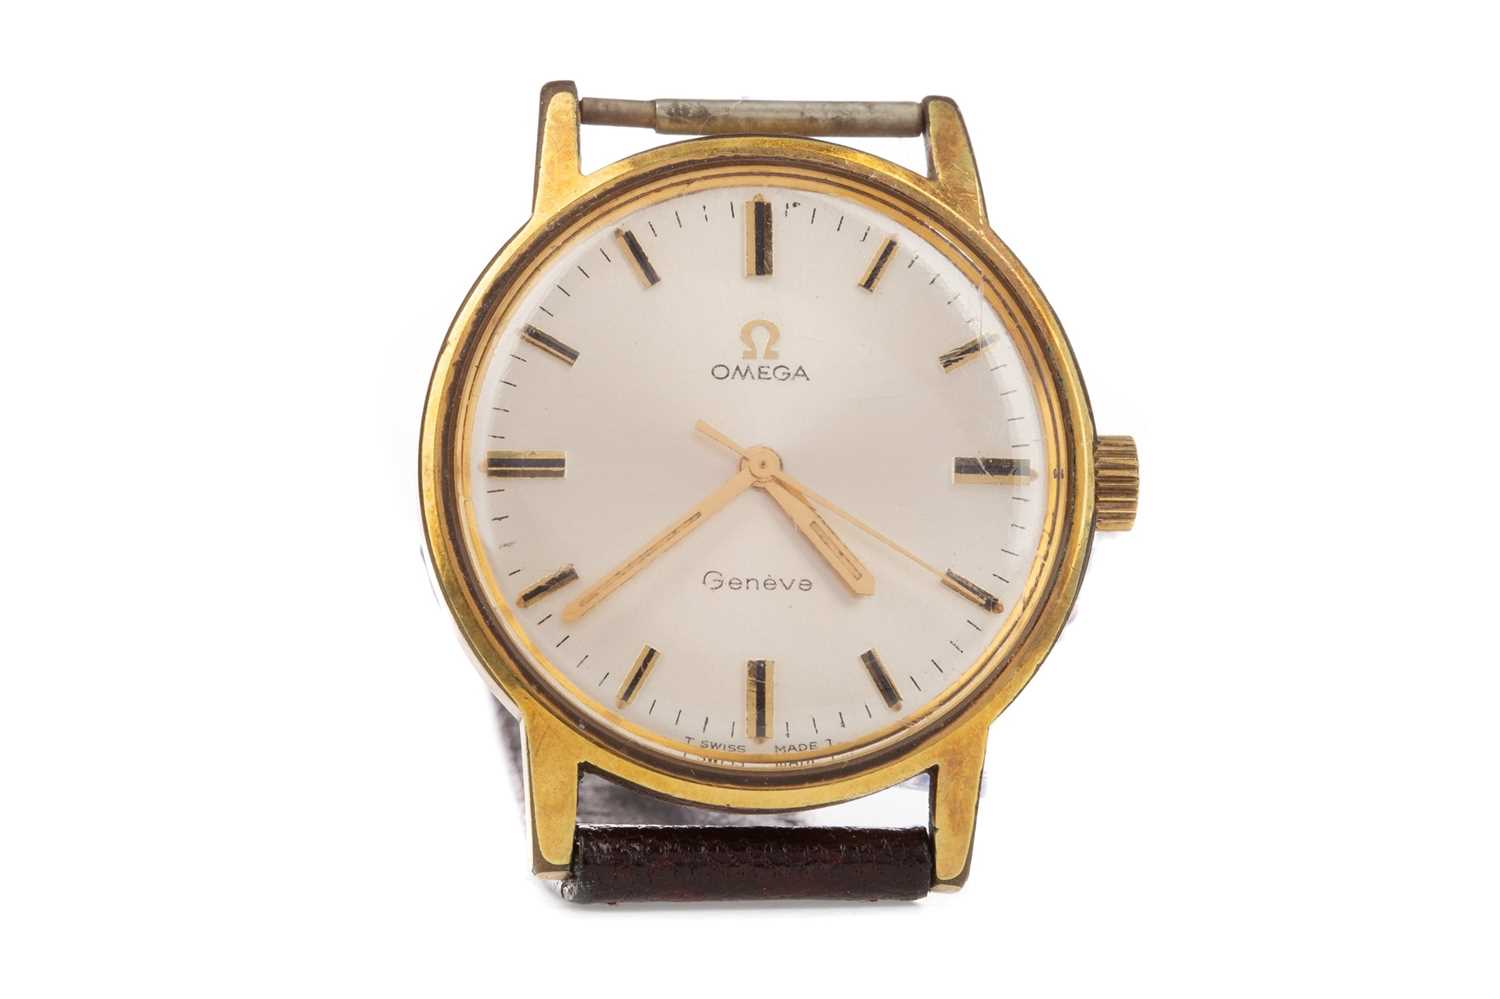 Lot 726 - A PARTIAL GENTLEMAN'S OMEGA GOLD PLATED MANUAL WIND WRIST WATCH